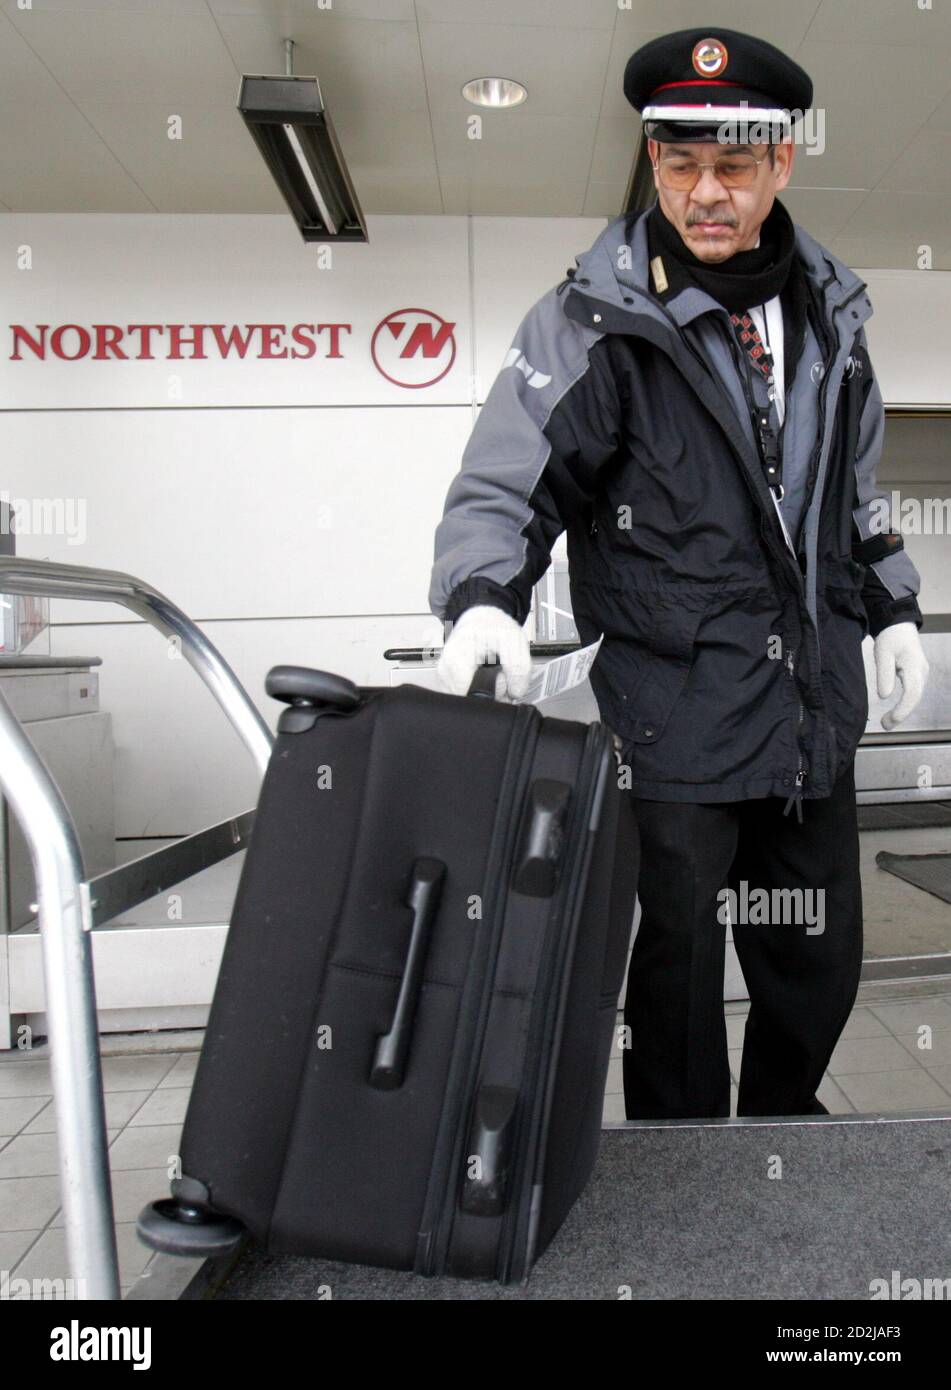 A Northwest Airlines skycap, Richard Reid, checks in luggage at the departure terminal of Detroit Metropolitan Airport in Romulus, Michigan March 1, 2006. Bankrupt Northwest Airlines on Wednesday reached a tentative labor deal with its flight attendants union but still faces a possible strike should it fail to reach agreement with its pilots ahead of a court-imposed deadline. Reid has worked for Northwest for 33 years. REUTERS/Rebecca Cook Stock Photo